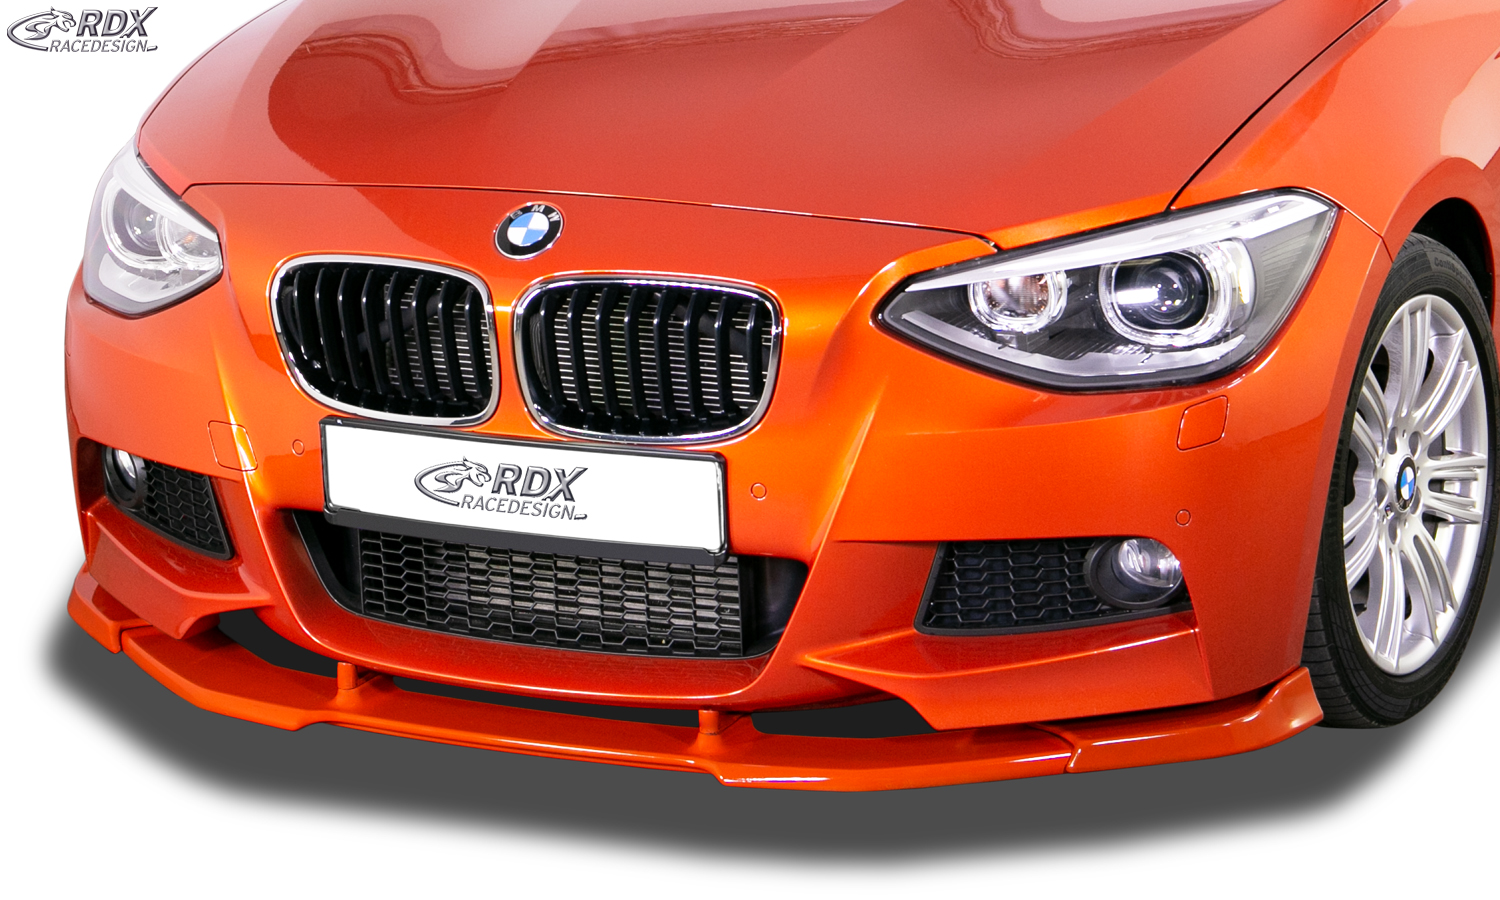 RDX Front Spoiler VARIO-X for BMW 1-series F20 / F21 2011-2015 (M-Package and M-Technik Frontbumper) Front Lip Splitter